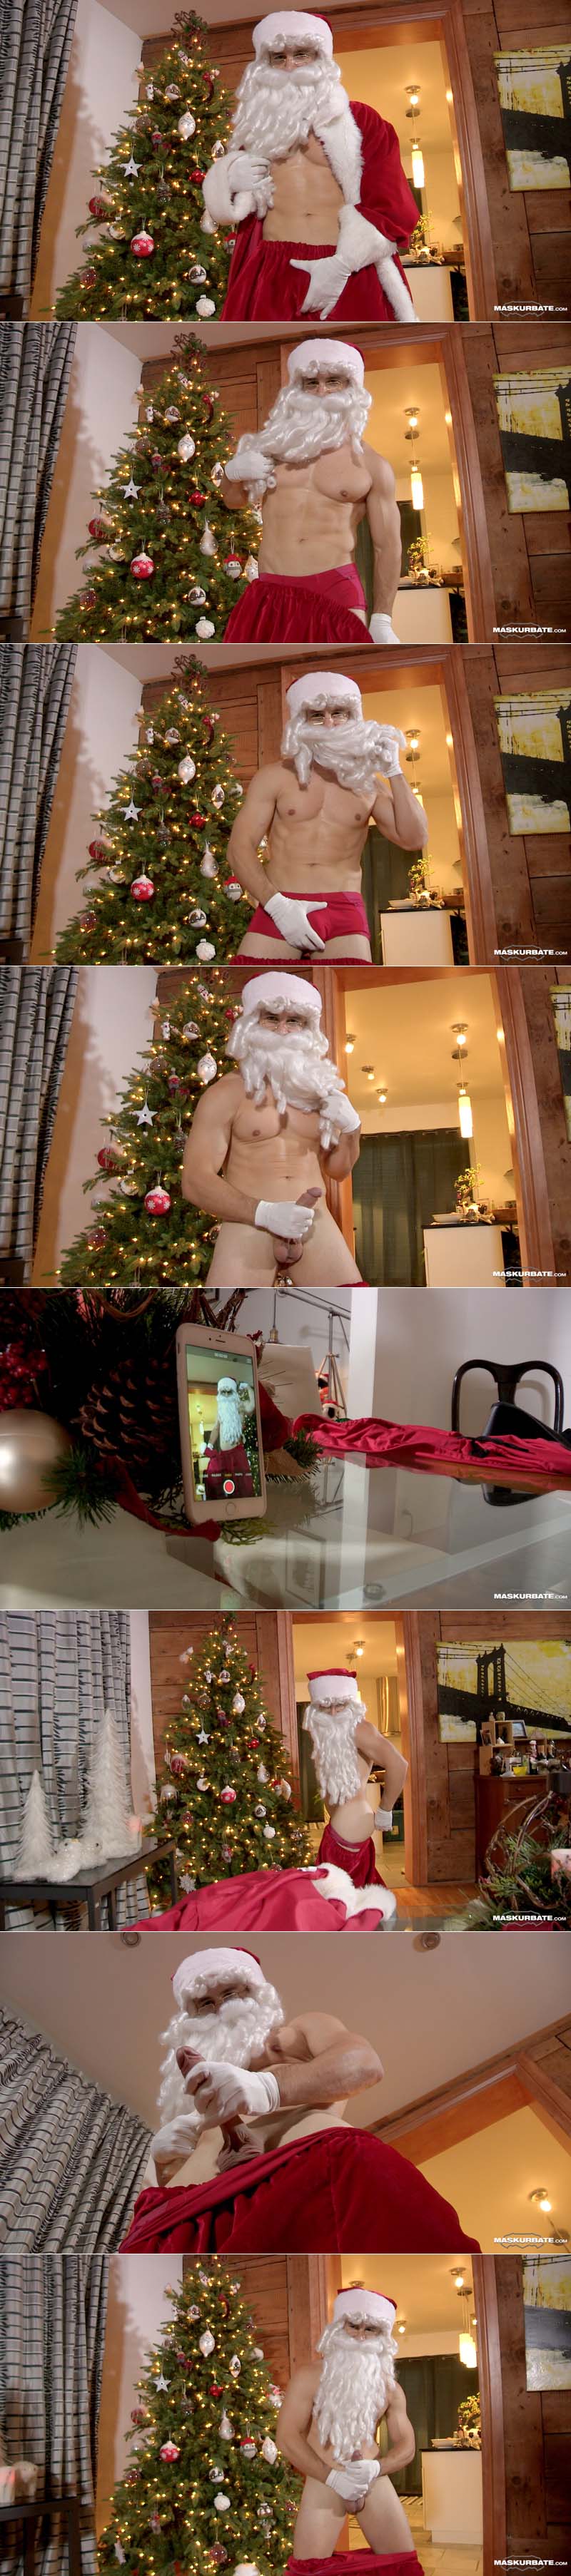 Santa Came On Christmas Eve (with Ricky) at Maskurbate